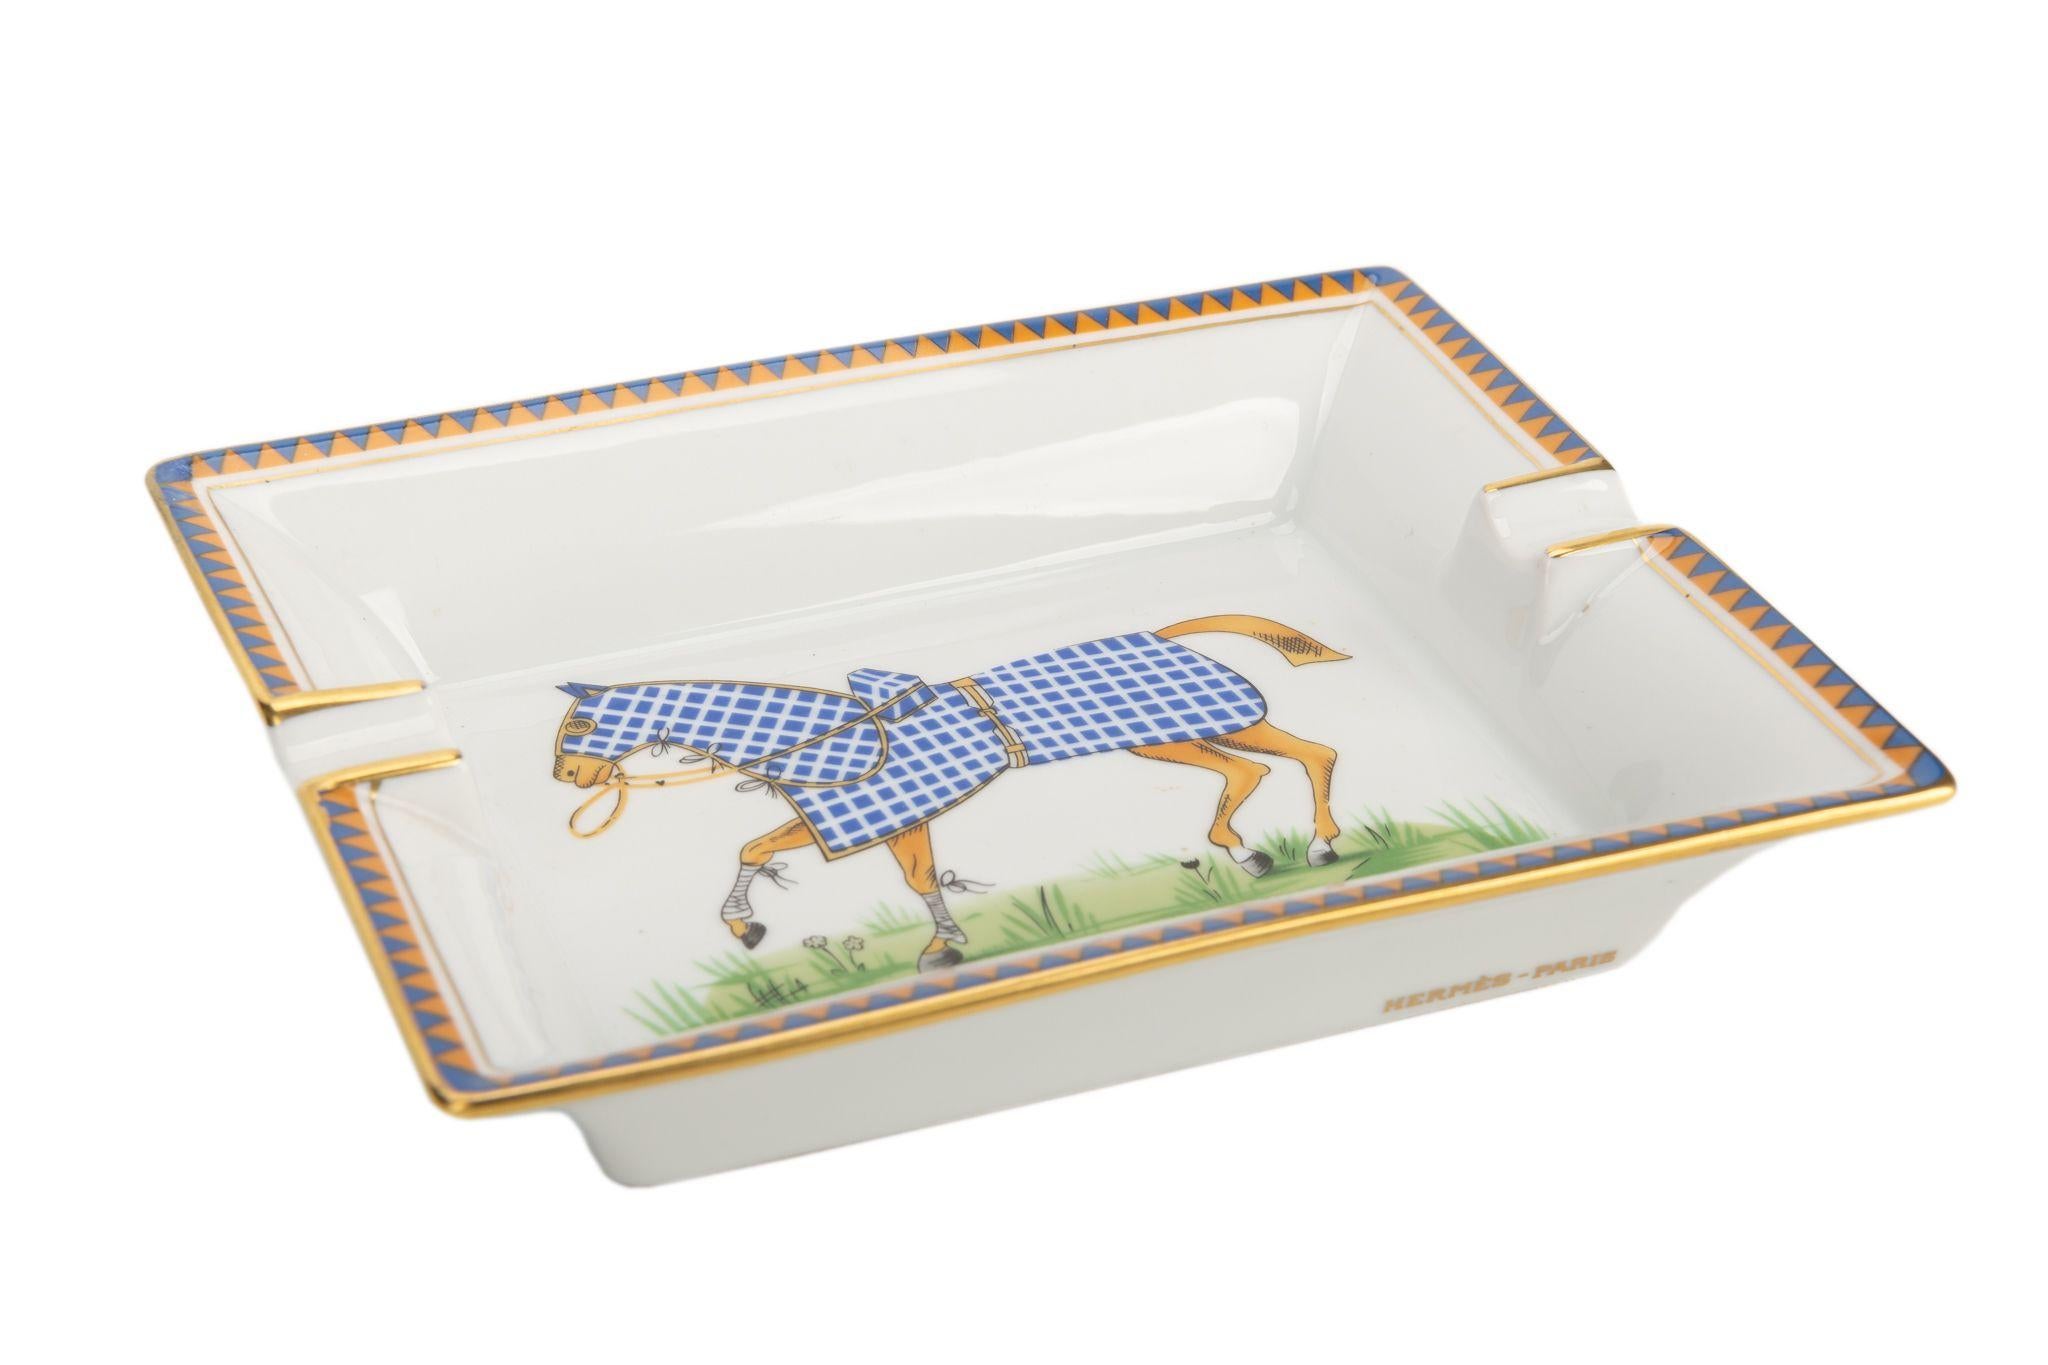 Hermès vintage ashtray in white porcelain with a horse in the center. The horse is decorated with a blue and white checkered blanket. Suede stamped bottom. The piece is in excellent condition.